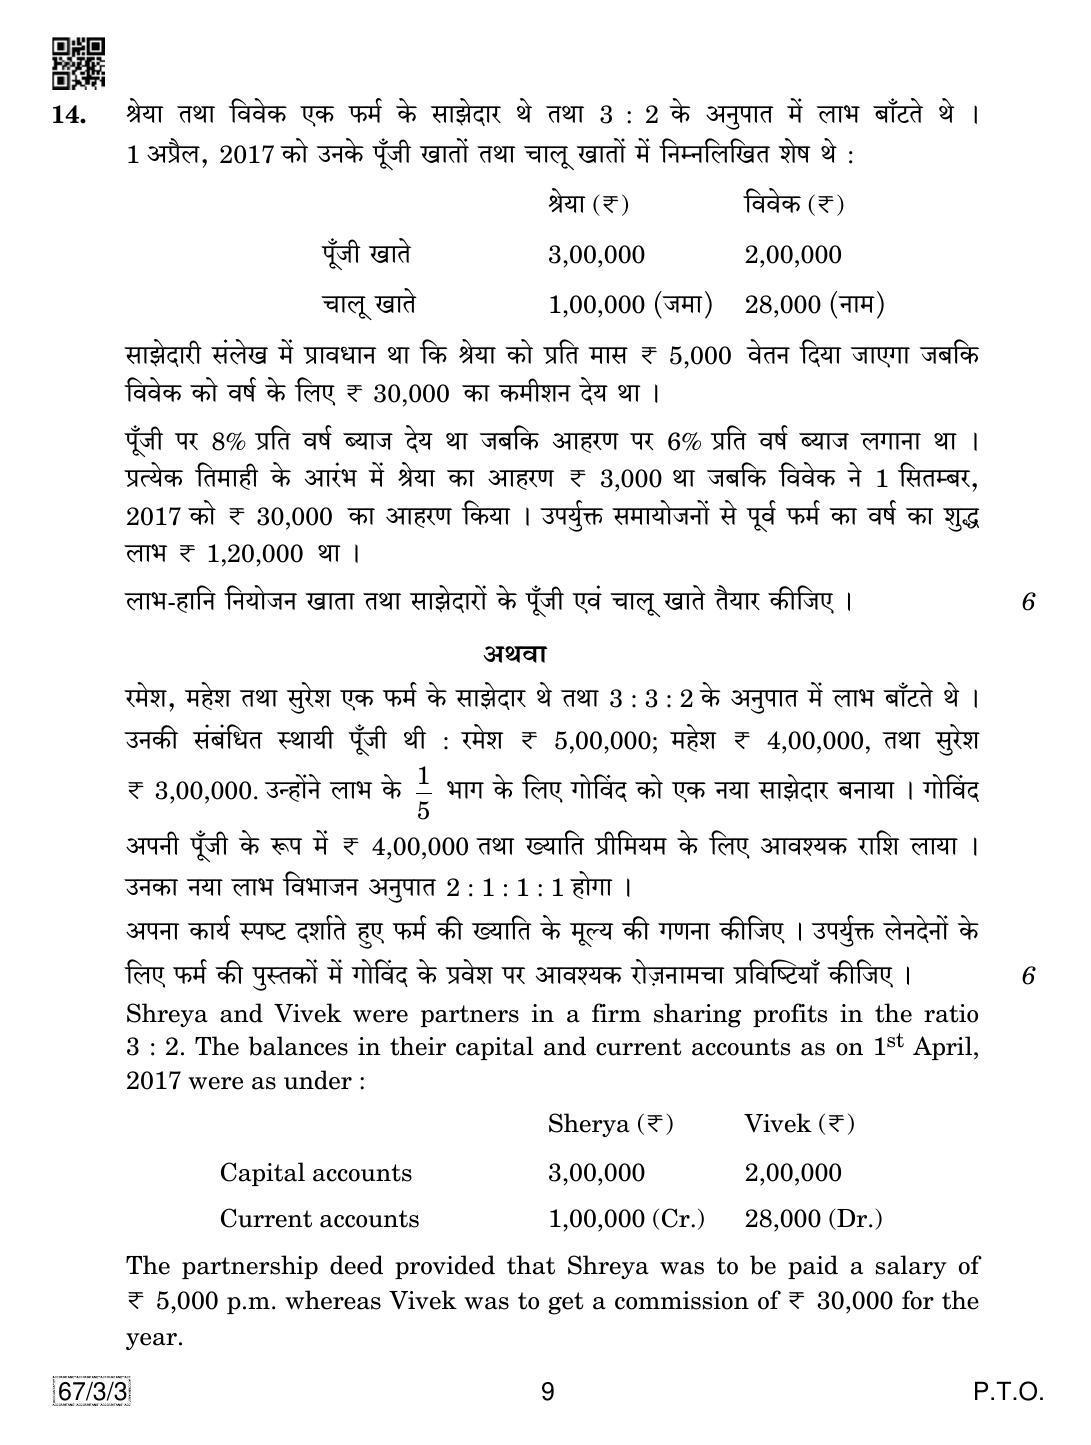 CBSE Class 12 67-3-3 Accountancy 2019 Question Paper - Page 9